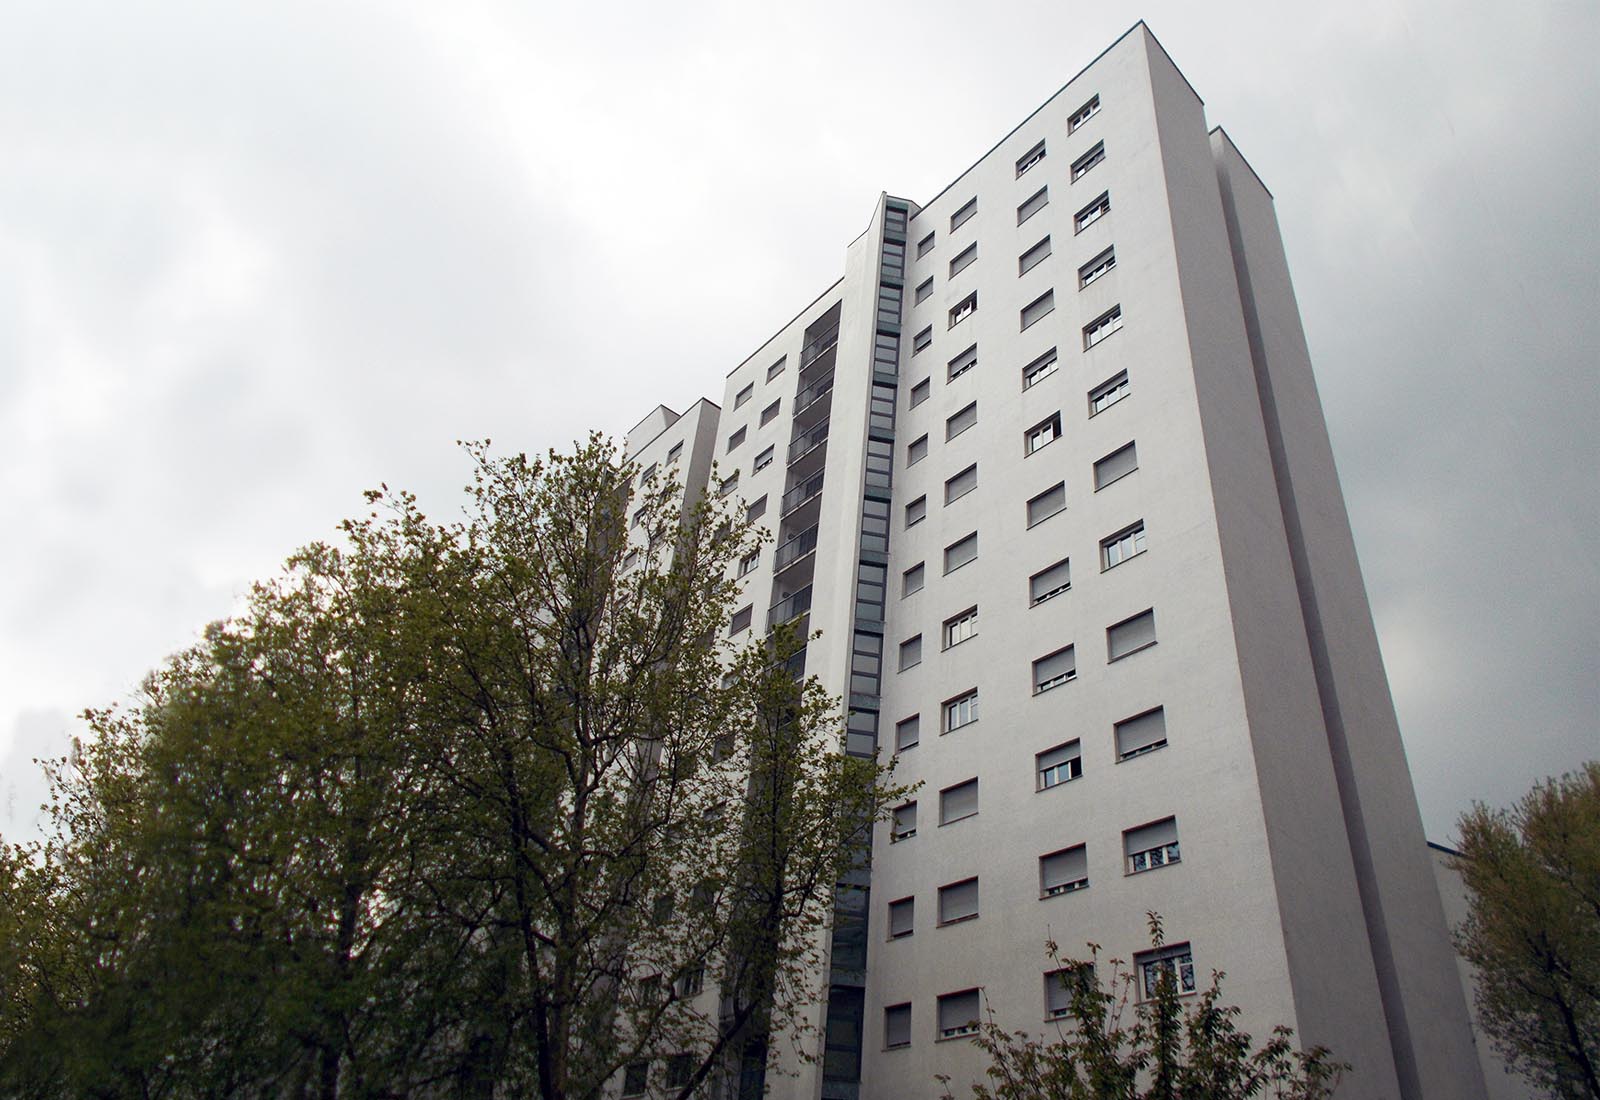 University residence in Corridoni street Milan - View of the tower A